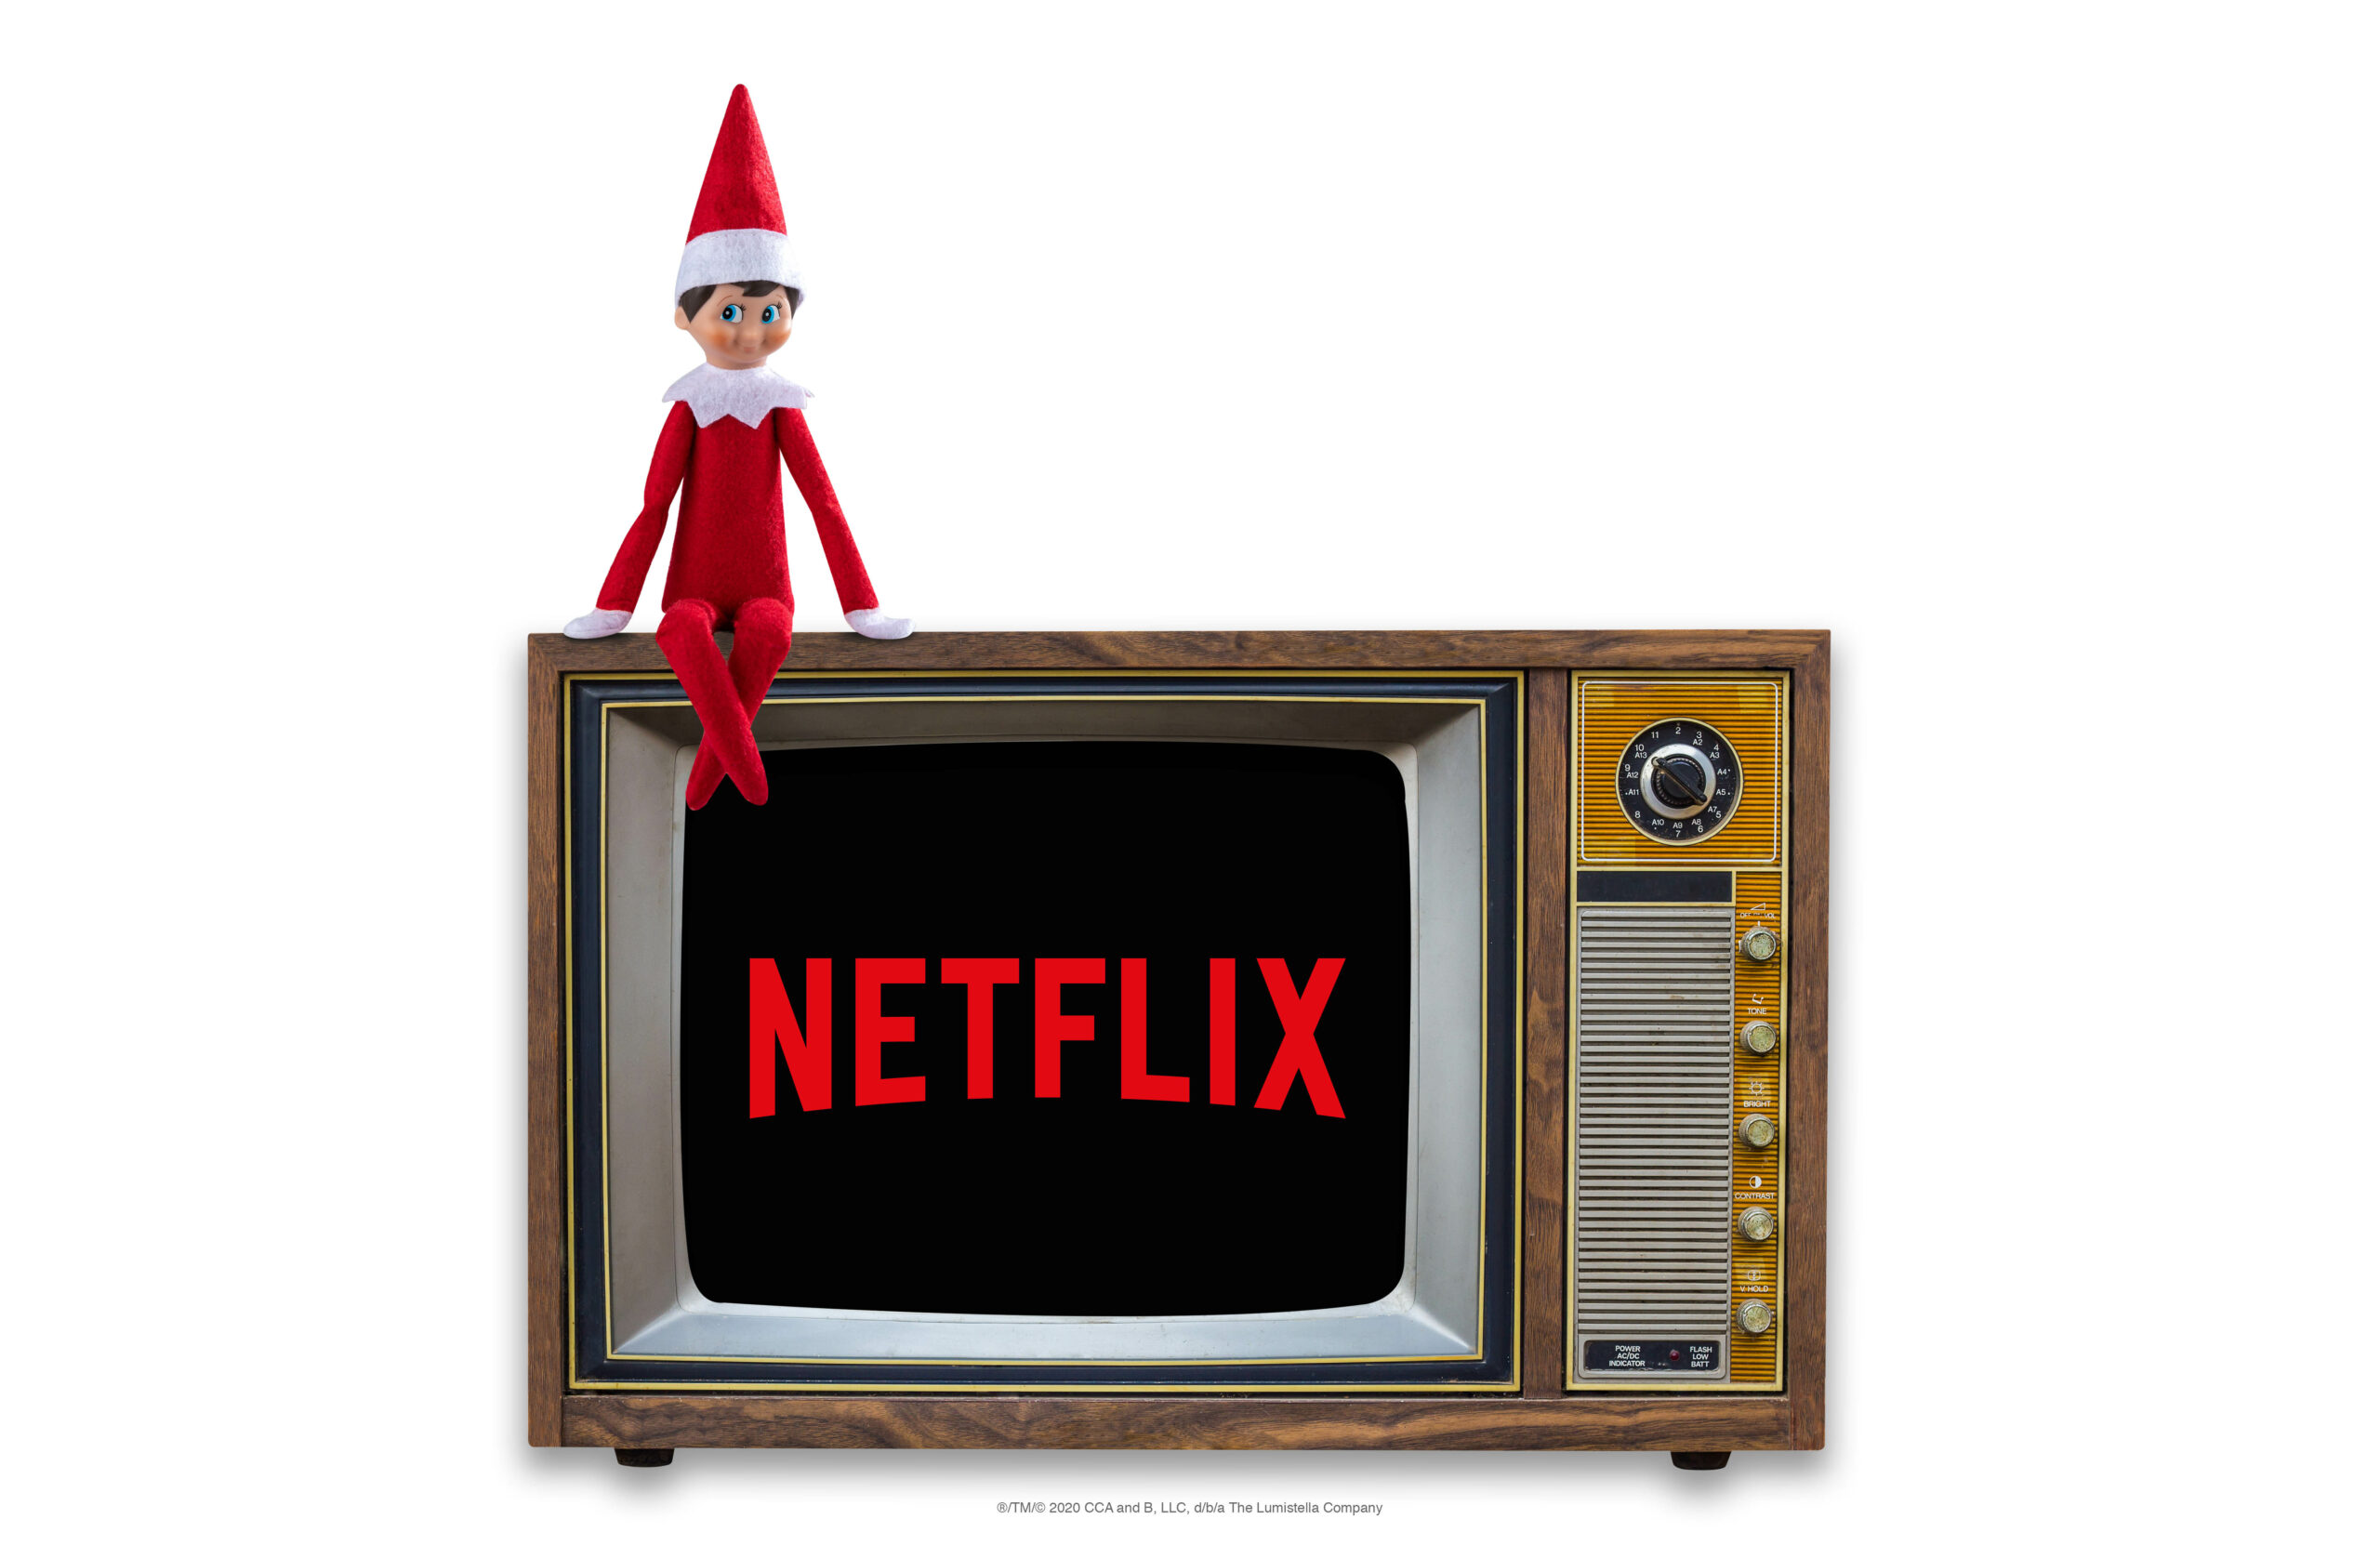 About Netflix - 'The Elf on the Shelf' is coming to Netflix